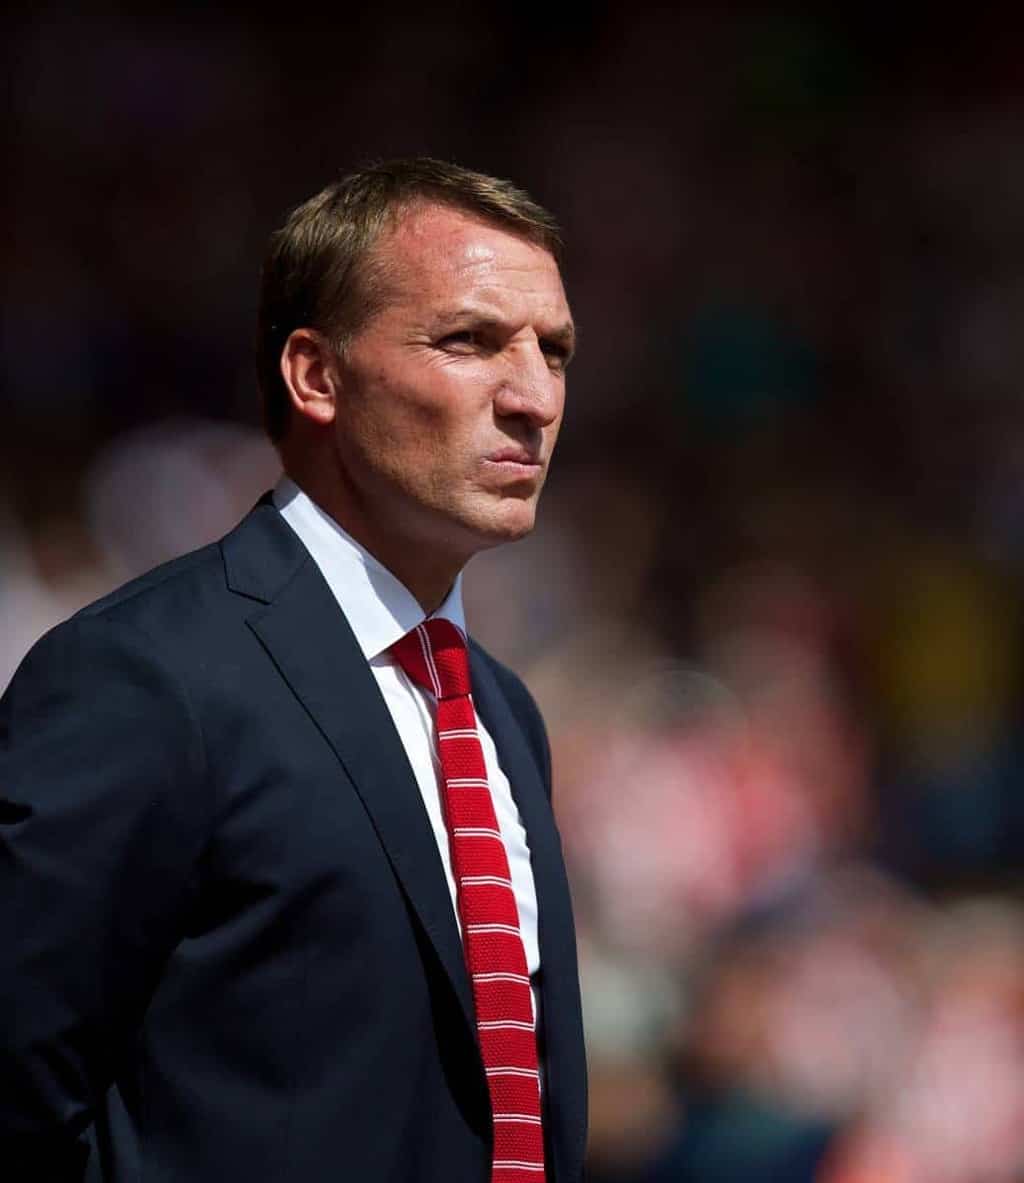 LIVERPOOL, ENGLAND - Sunday, August 17, 2014: Liverpool's manager Brendan Rodgers before the Premier League match against Southampton at Anfield. (Pic by David Rawcliffe/Propaganda)